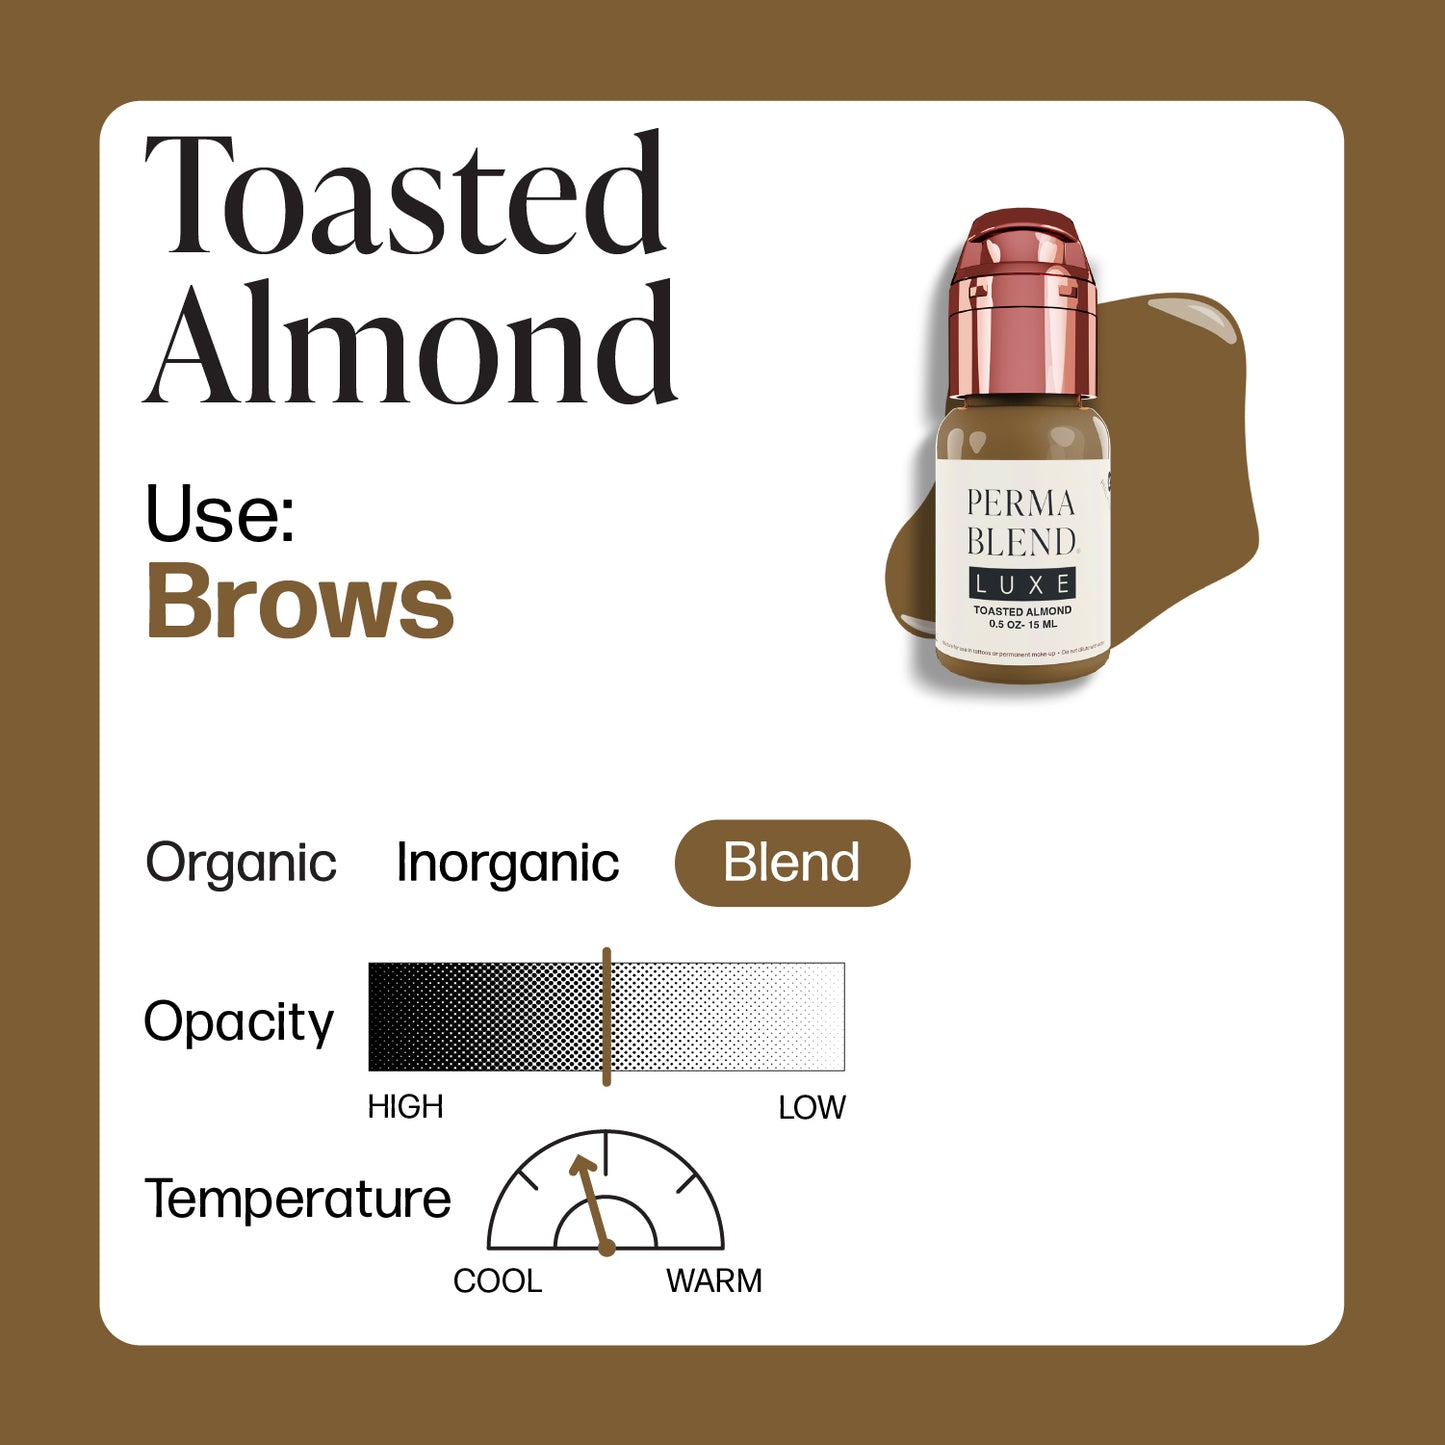 Perma Blend LUXE Toasted Almond